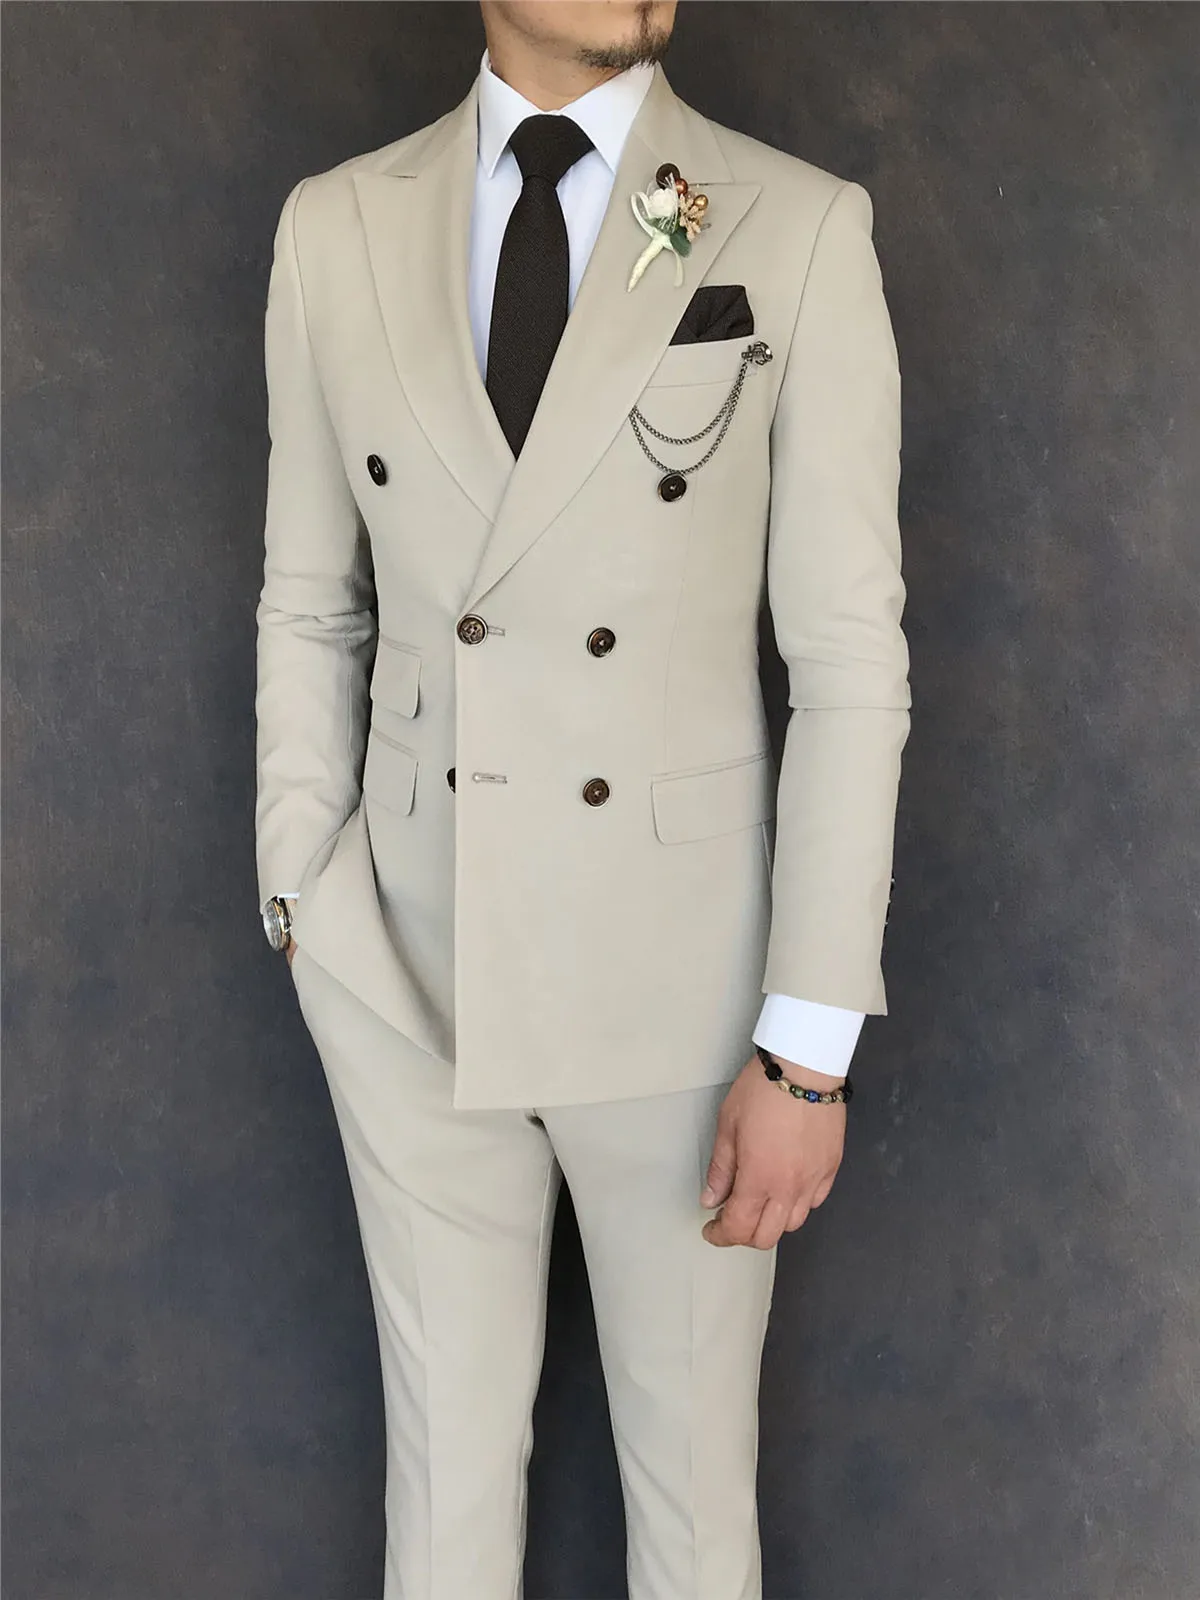 2023 Men's Suit 2-piece Double-breasted High-end Suit Suitable for Wedding Groom Groomsman Business Office Leisure Place